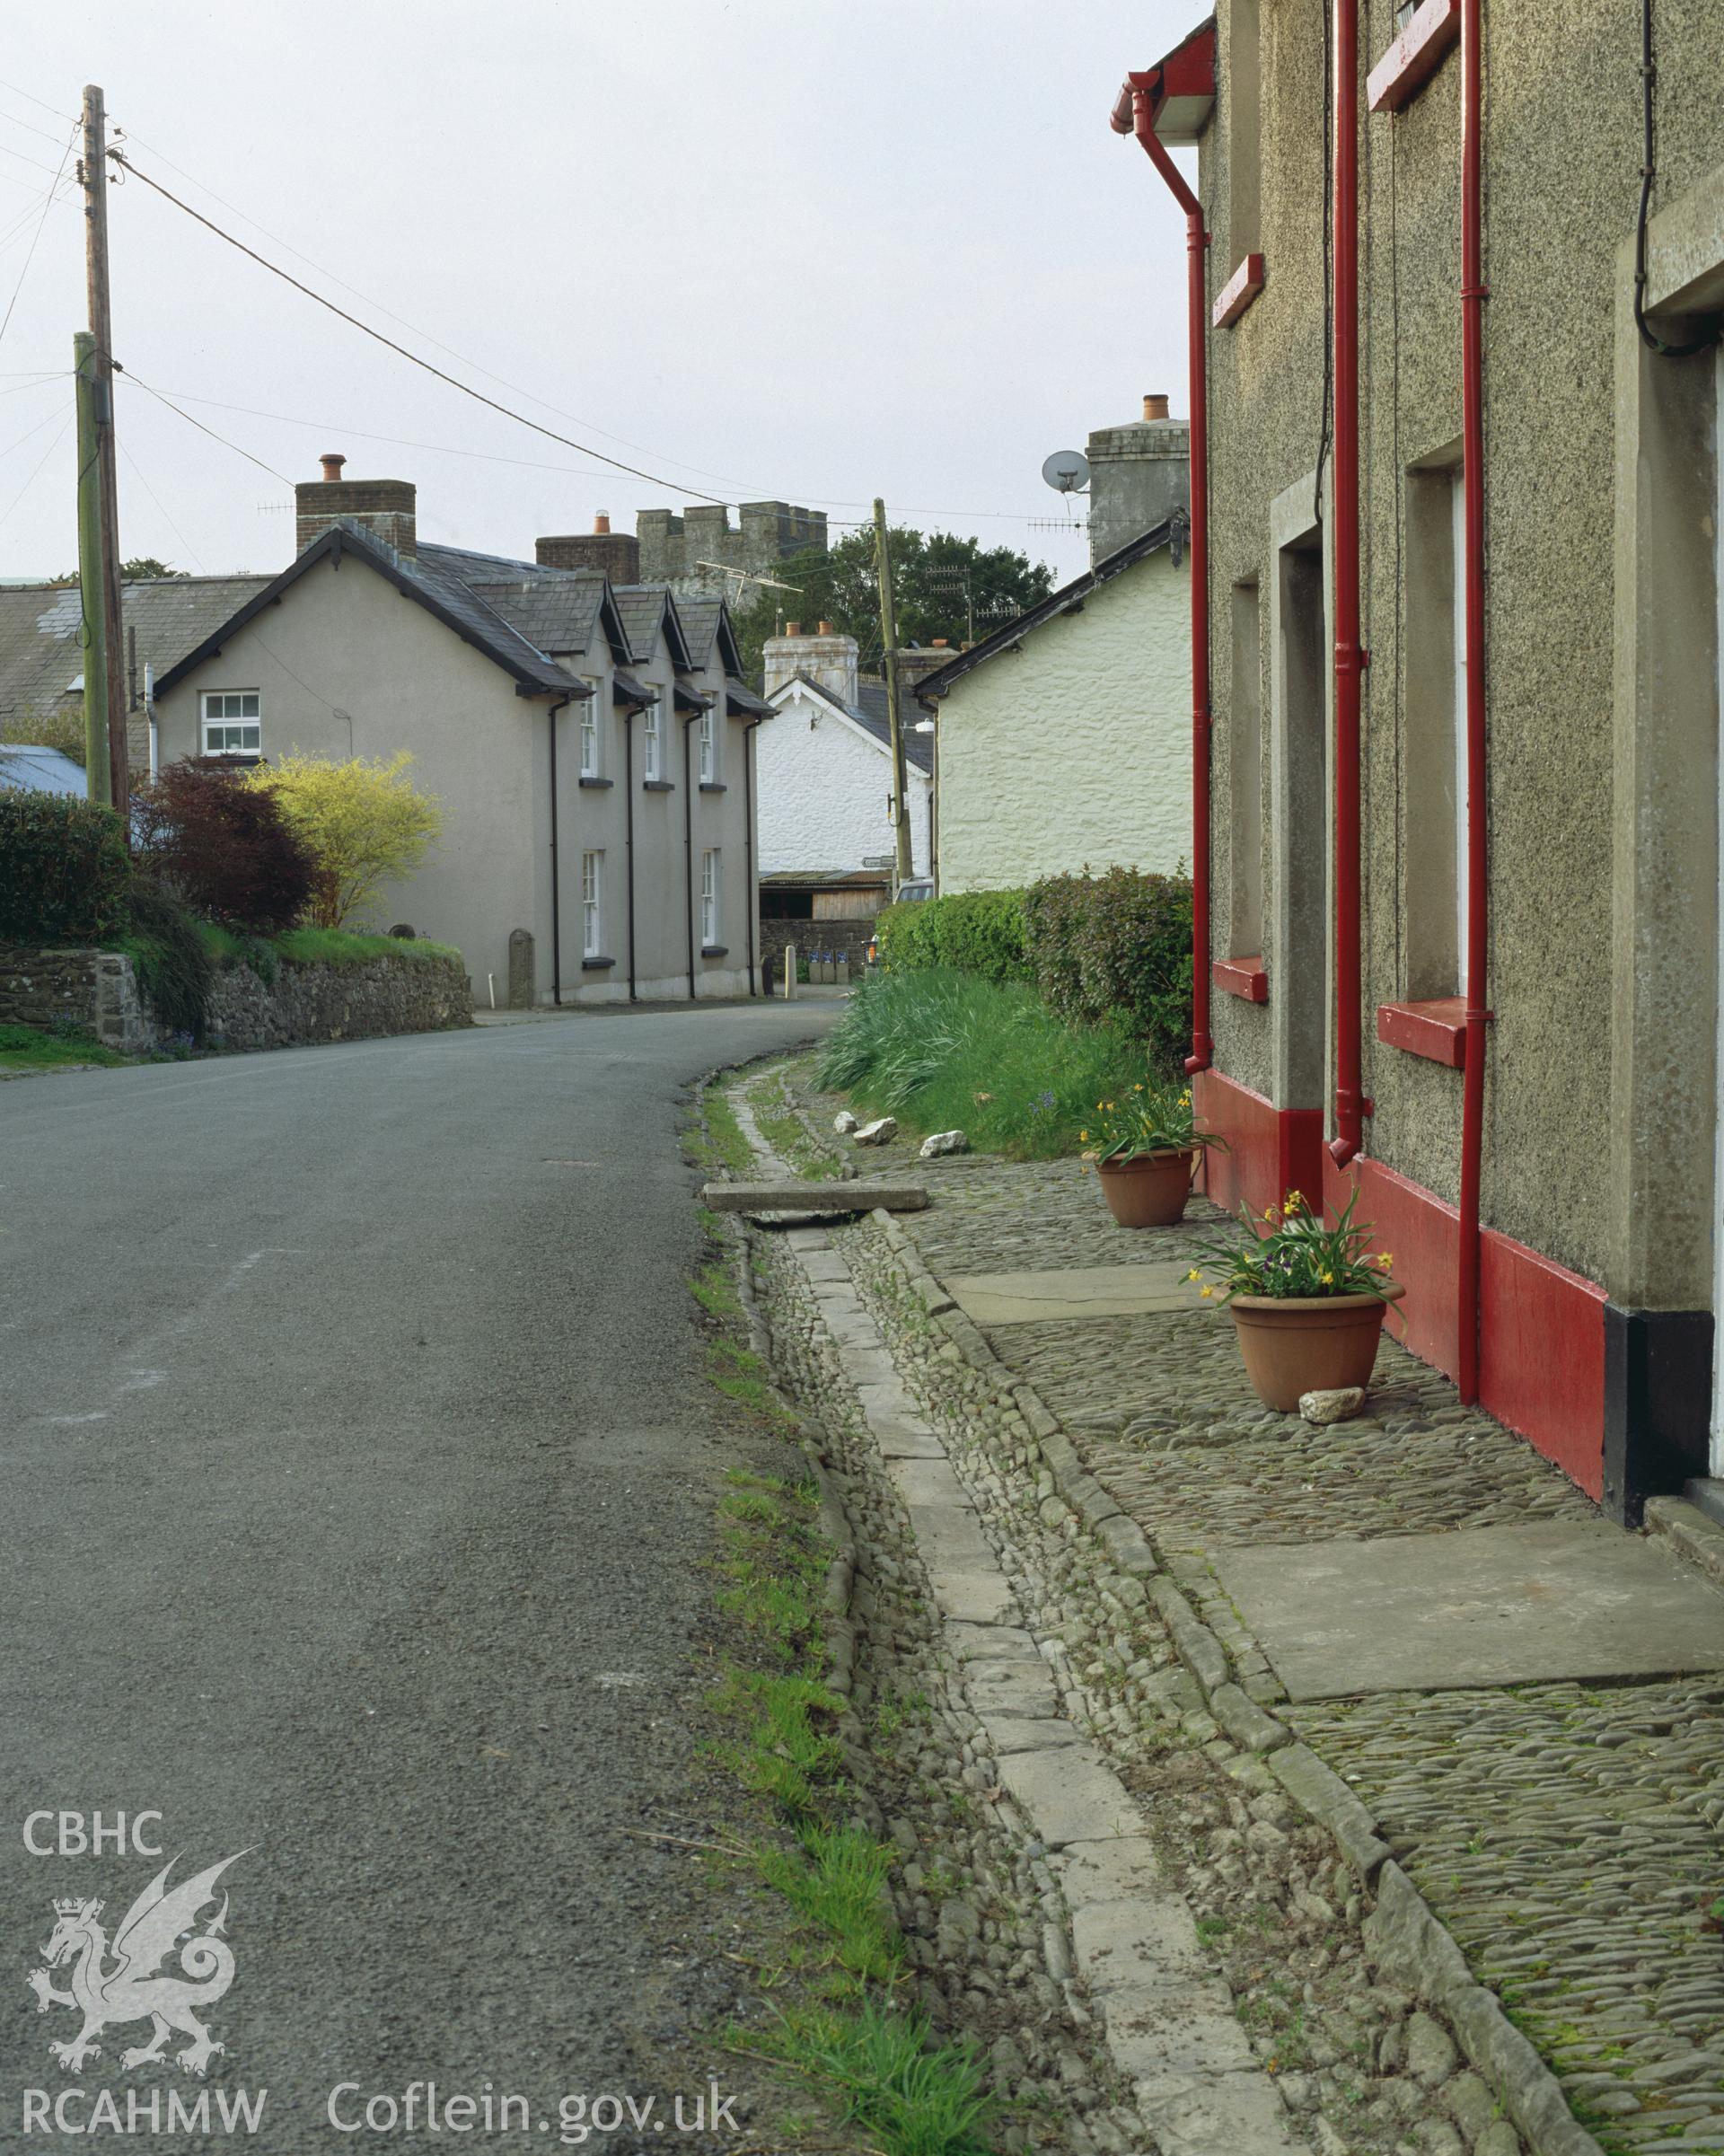 Colour transparency showing view of a street in Cilycwm, produced by Iain Wright, June 2004.